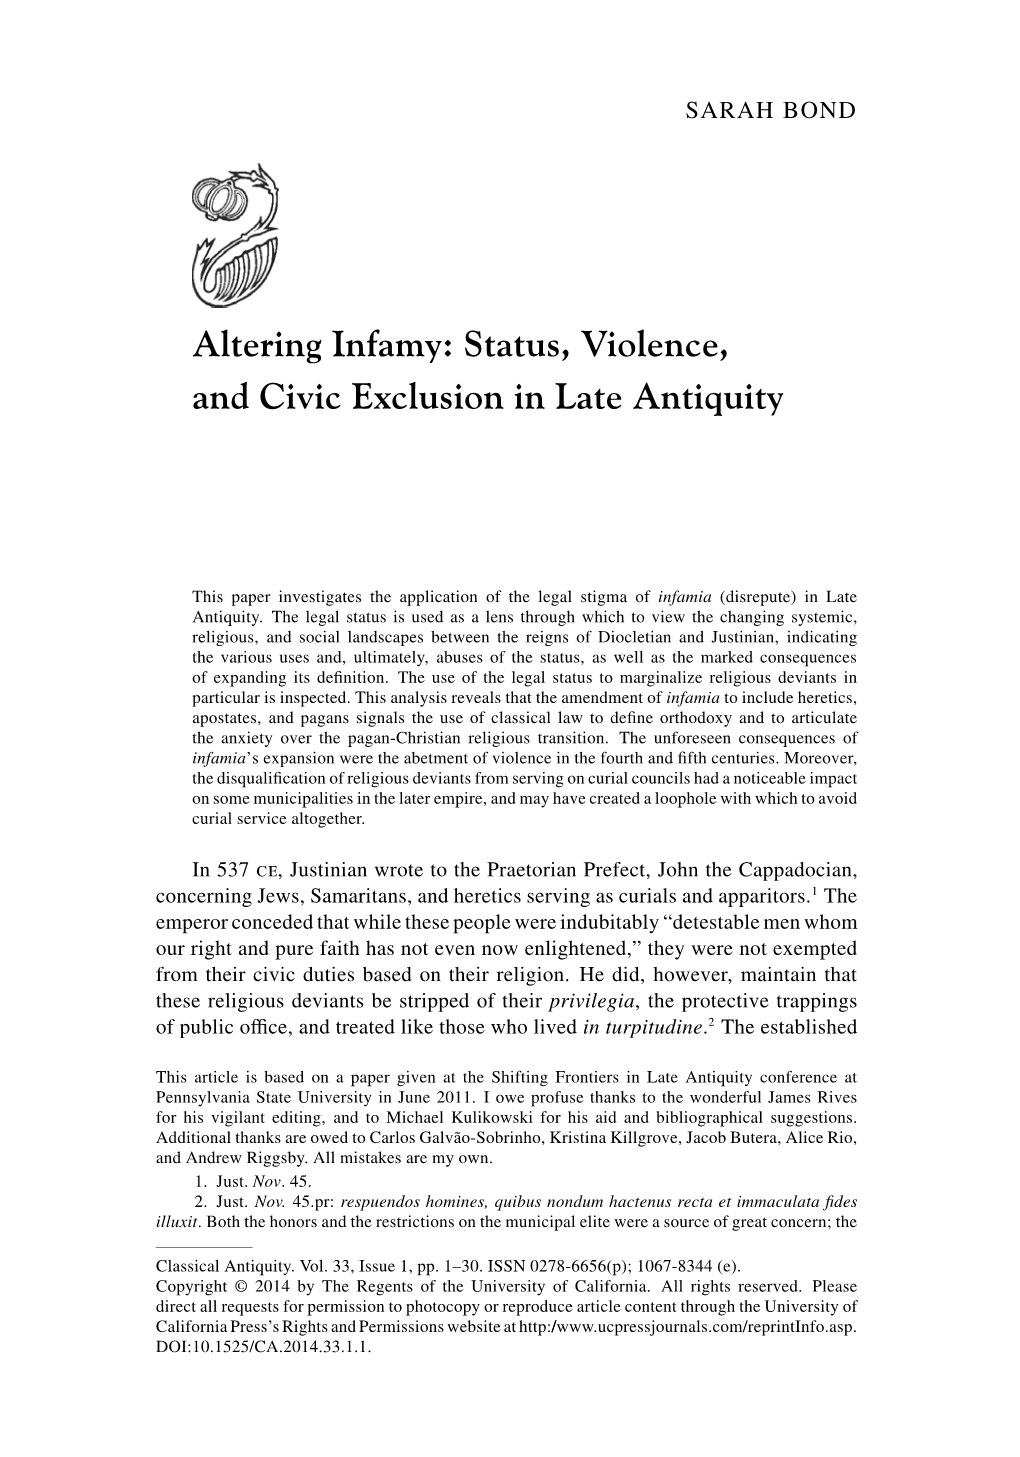 Altering Infamy: Status, Violence, and Civic Exclusion in Late Antiquity